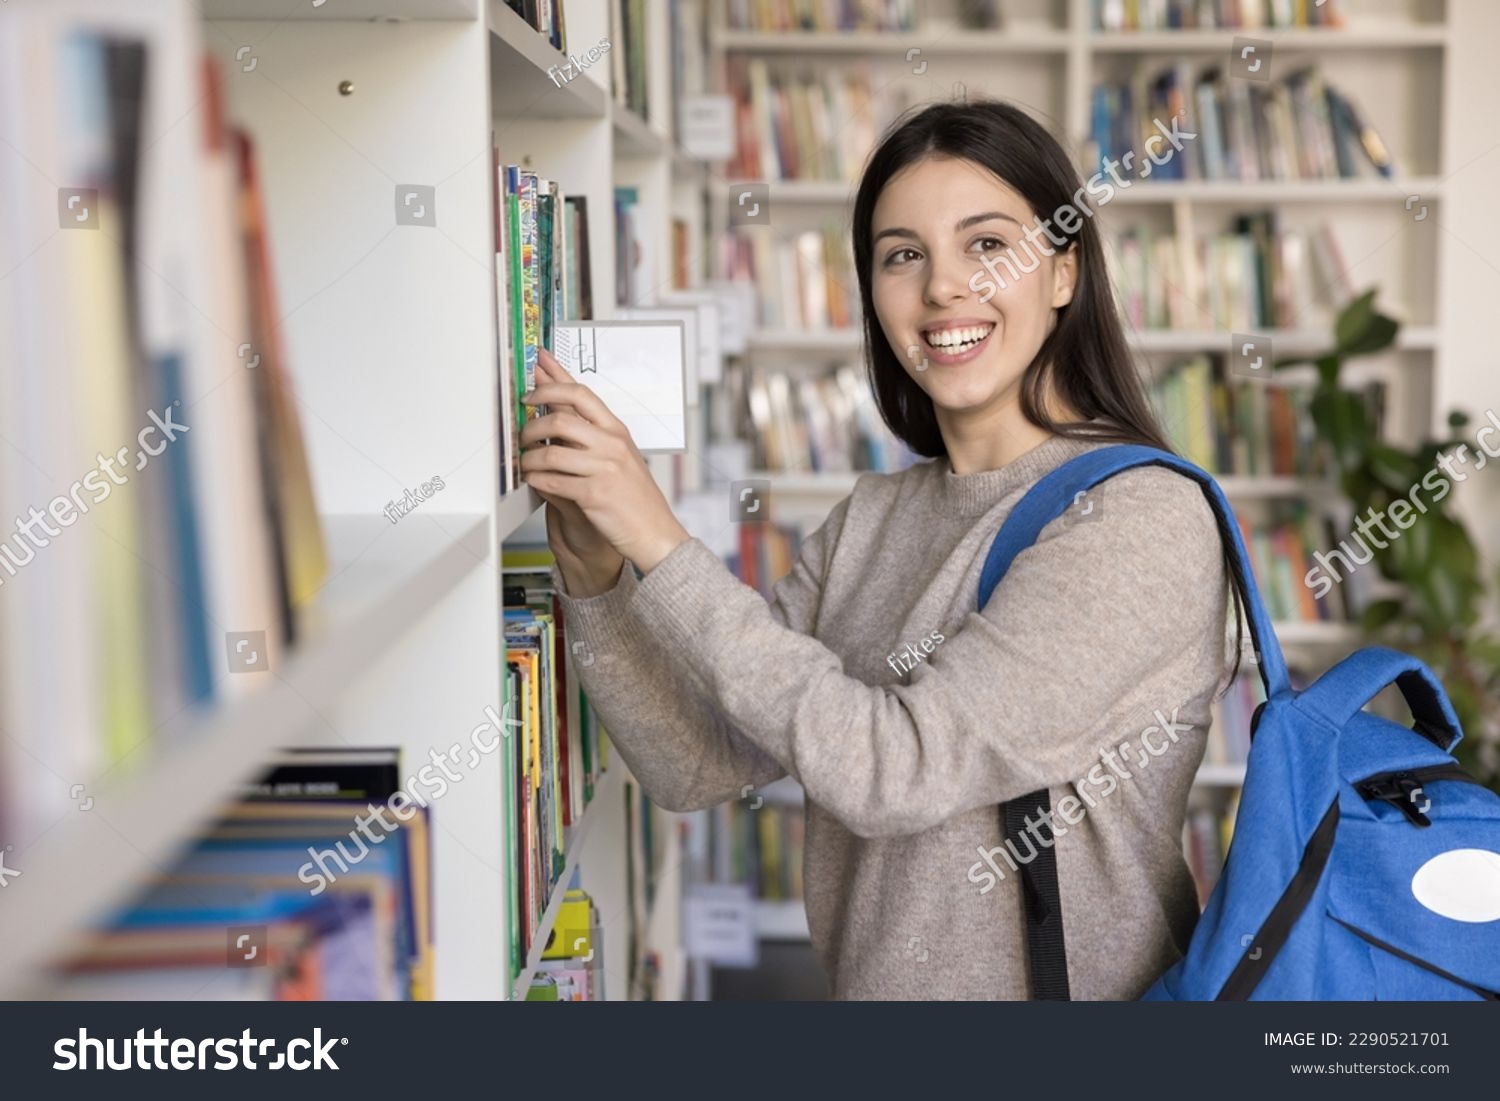 Pretty girl chooses books, standing in public library. Caucasian female student prepares for university admission looks interested and motivated, take textbook staring aside. Education, new knowledge #2290521701